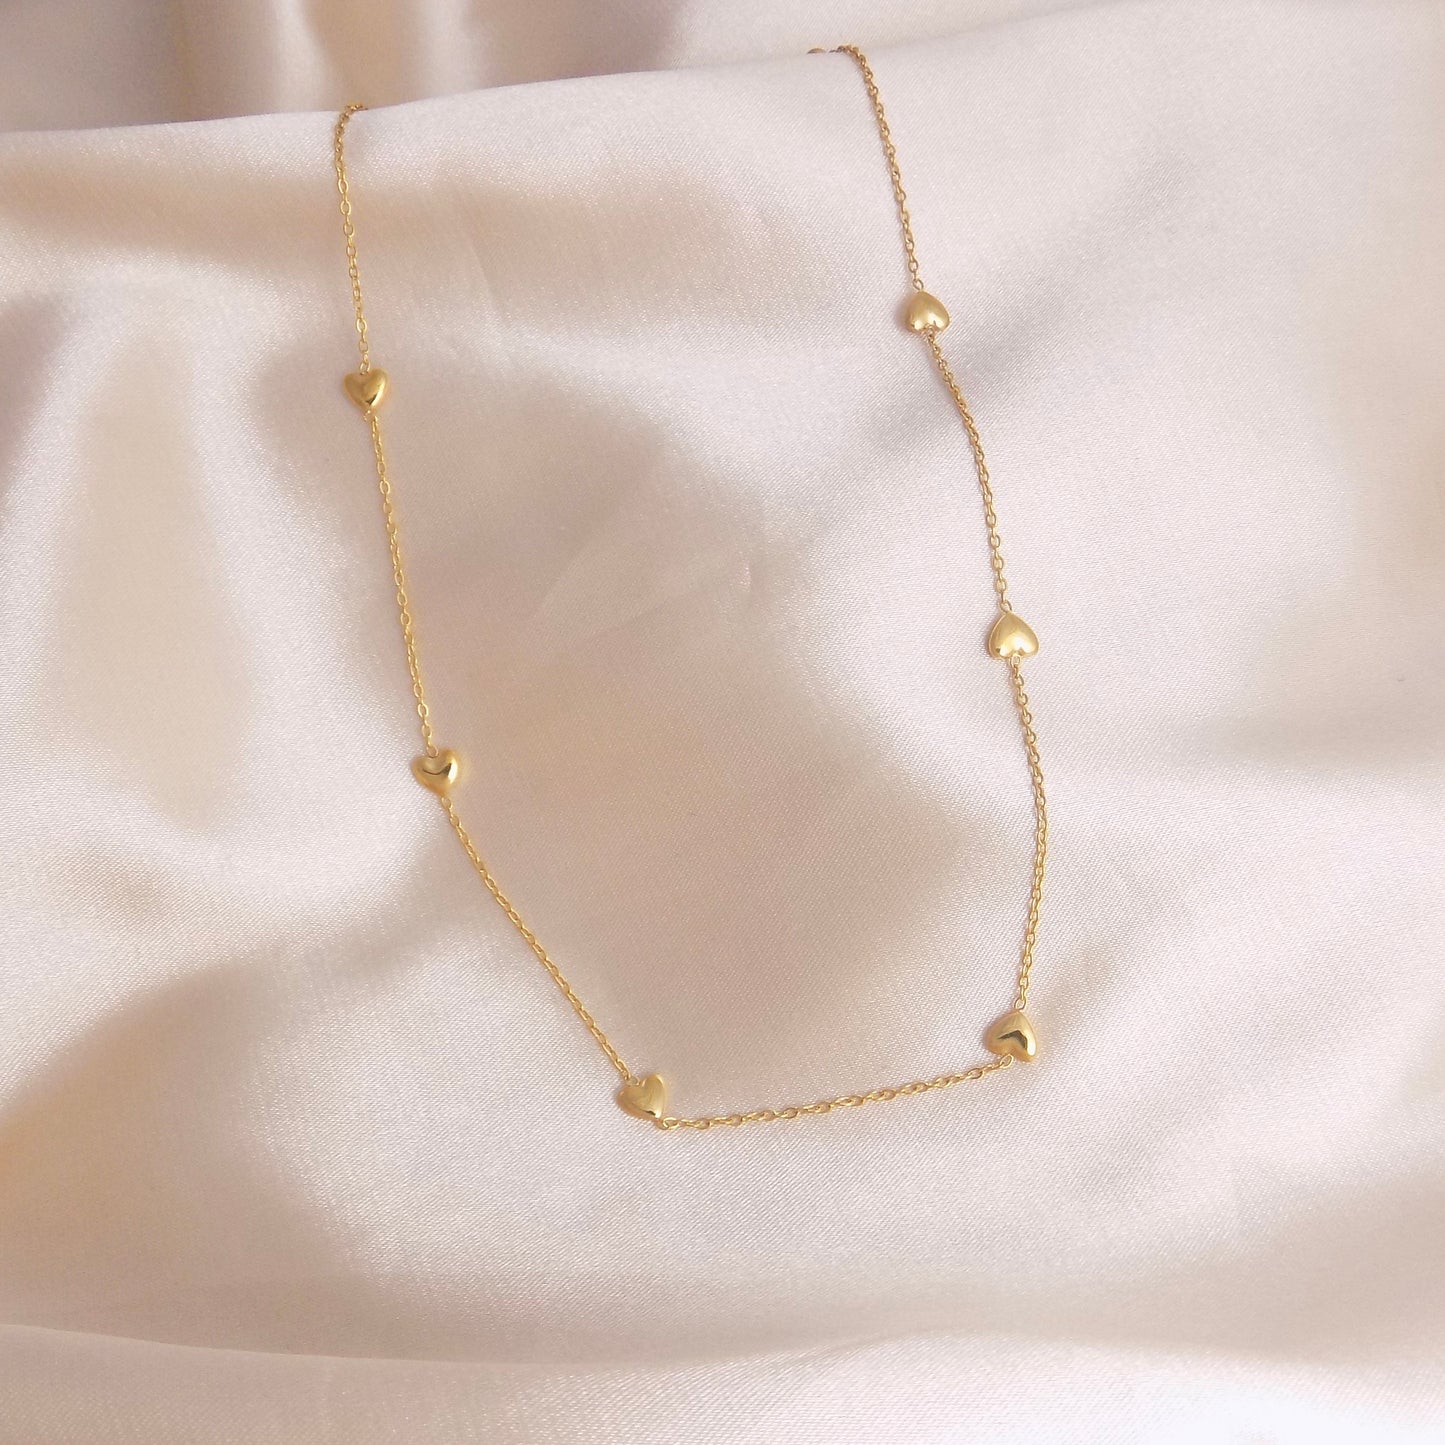 Dainty Gold Heart Chain Necklace Stainless Steel - Minimalist Trendy Jewelry